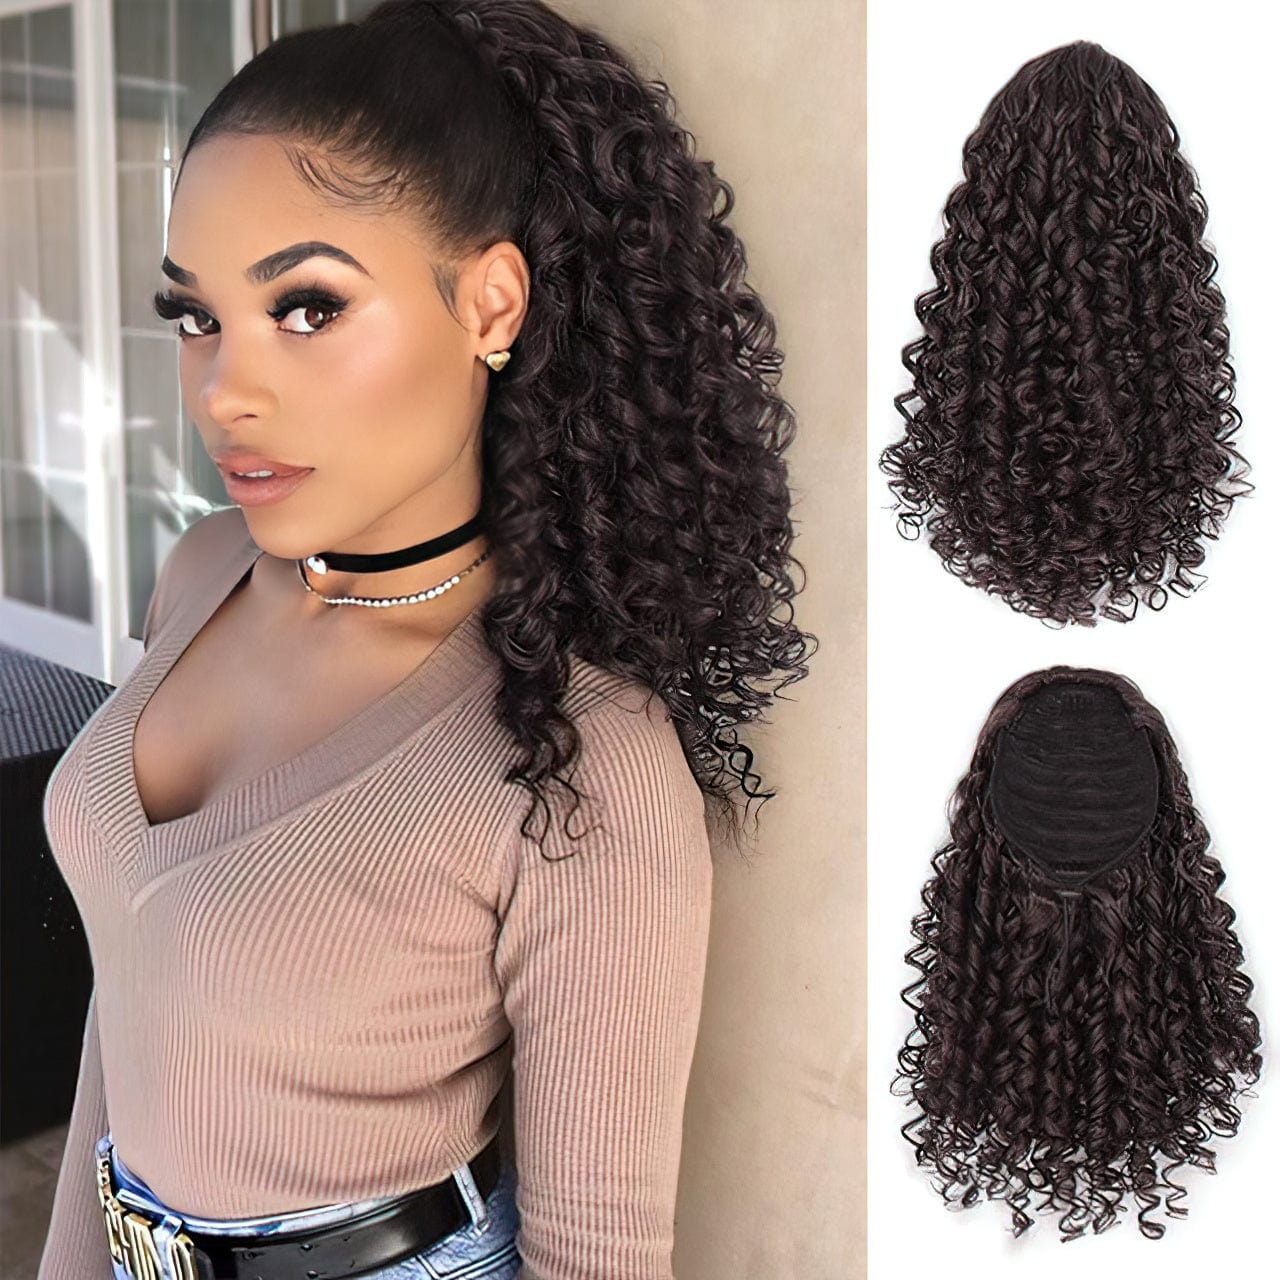 Puff Kinky Curly Afro Ponytail